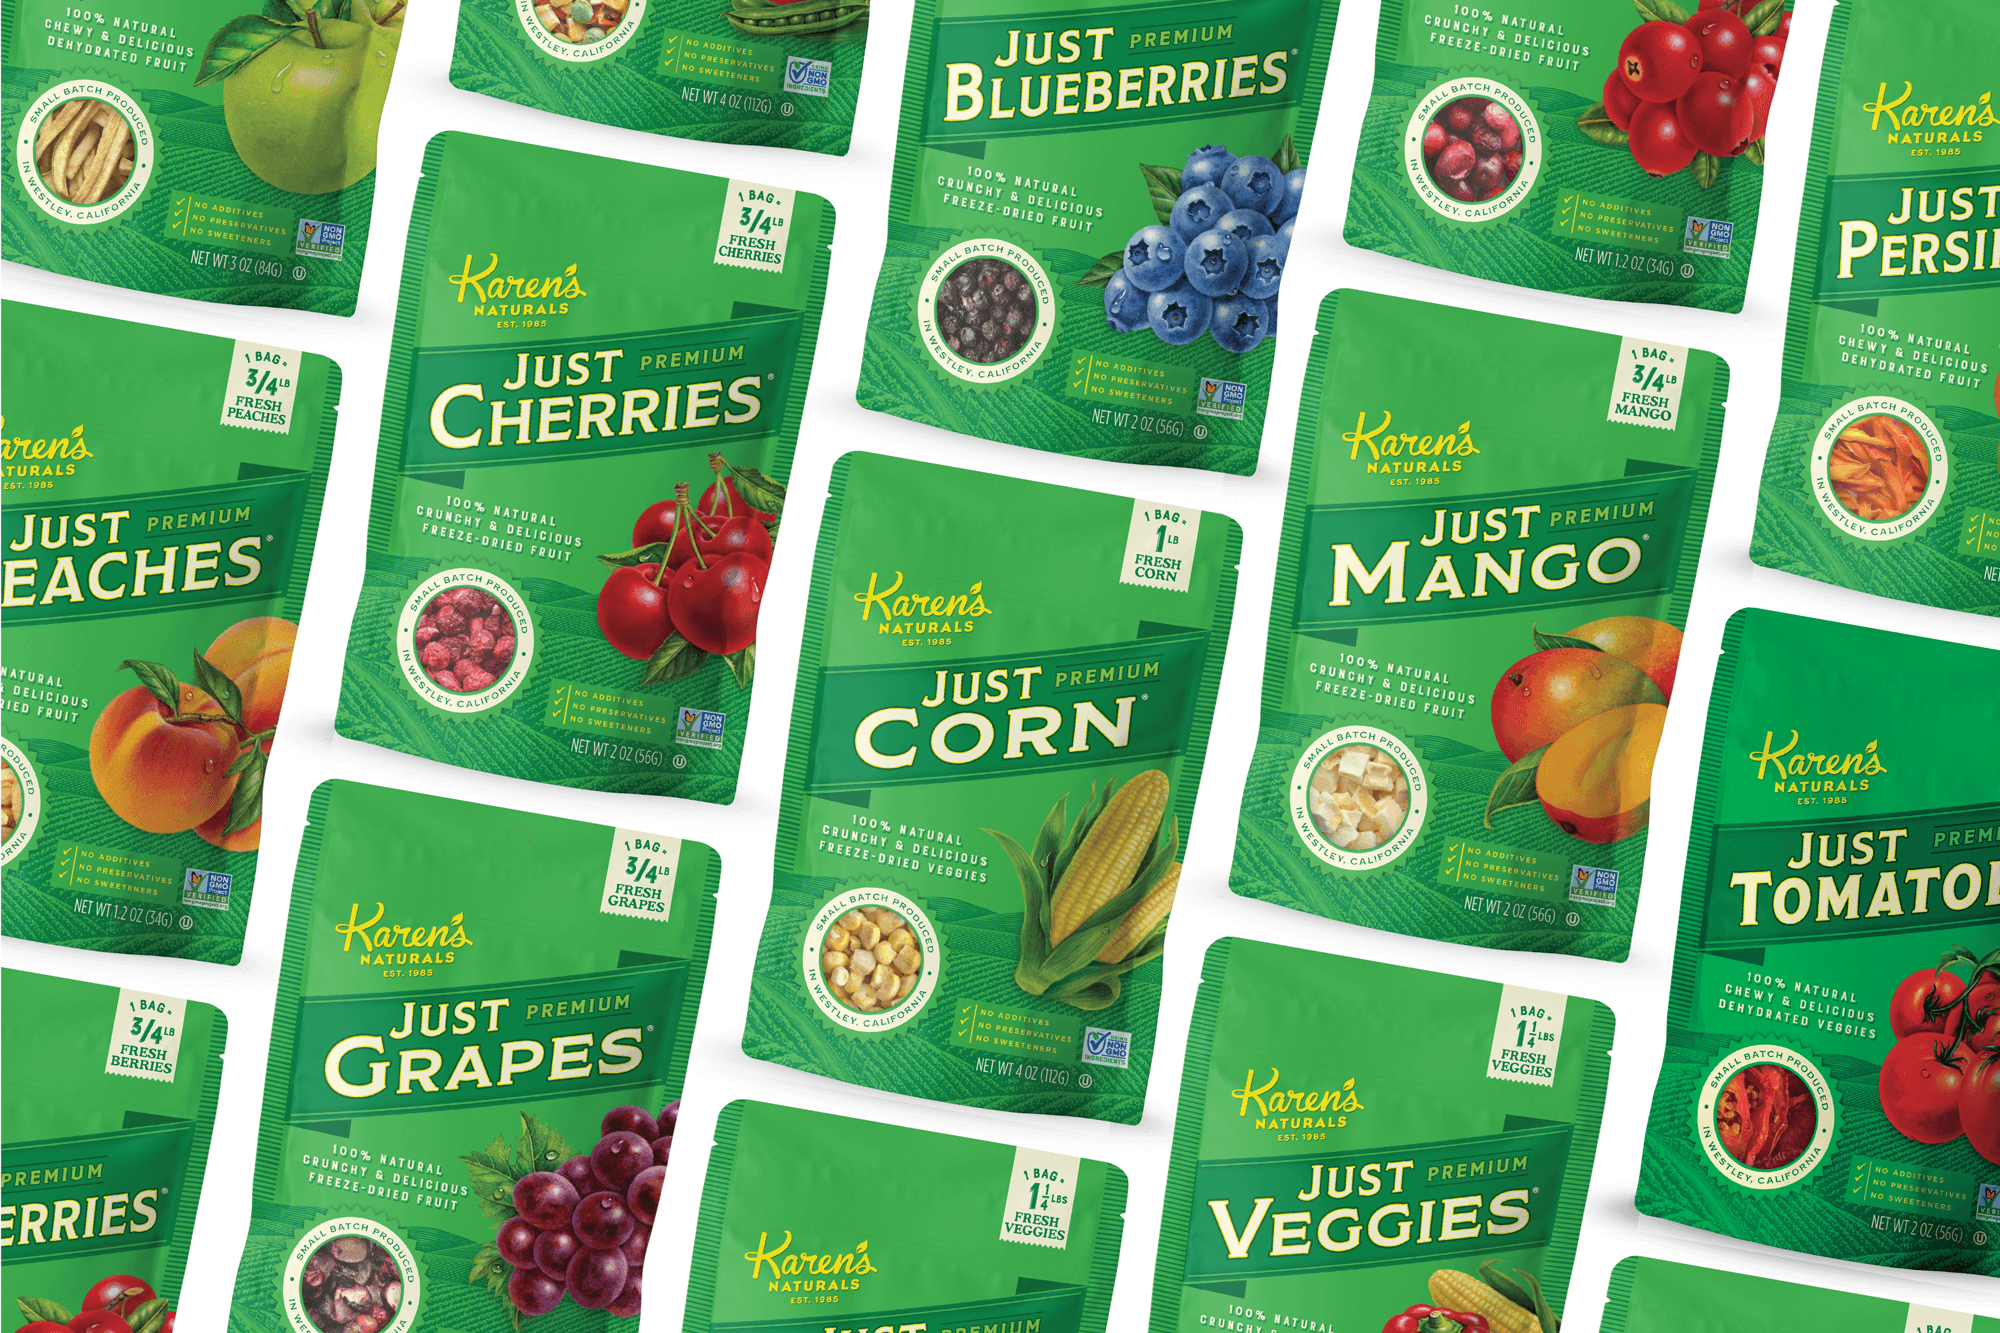 Karen's Naturals new packaging. Lot's of California produce: cherry, blueberry, peaches, grapes, corn, mango, tomatoes, and apples.  